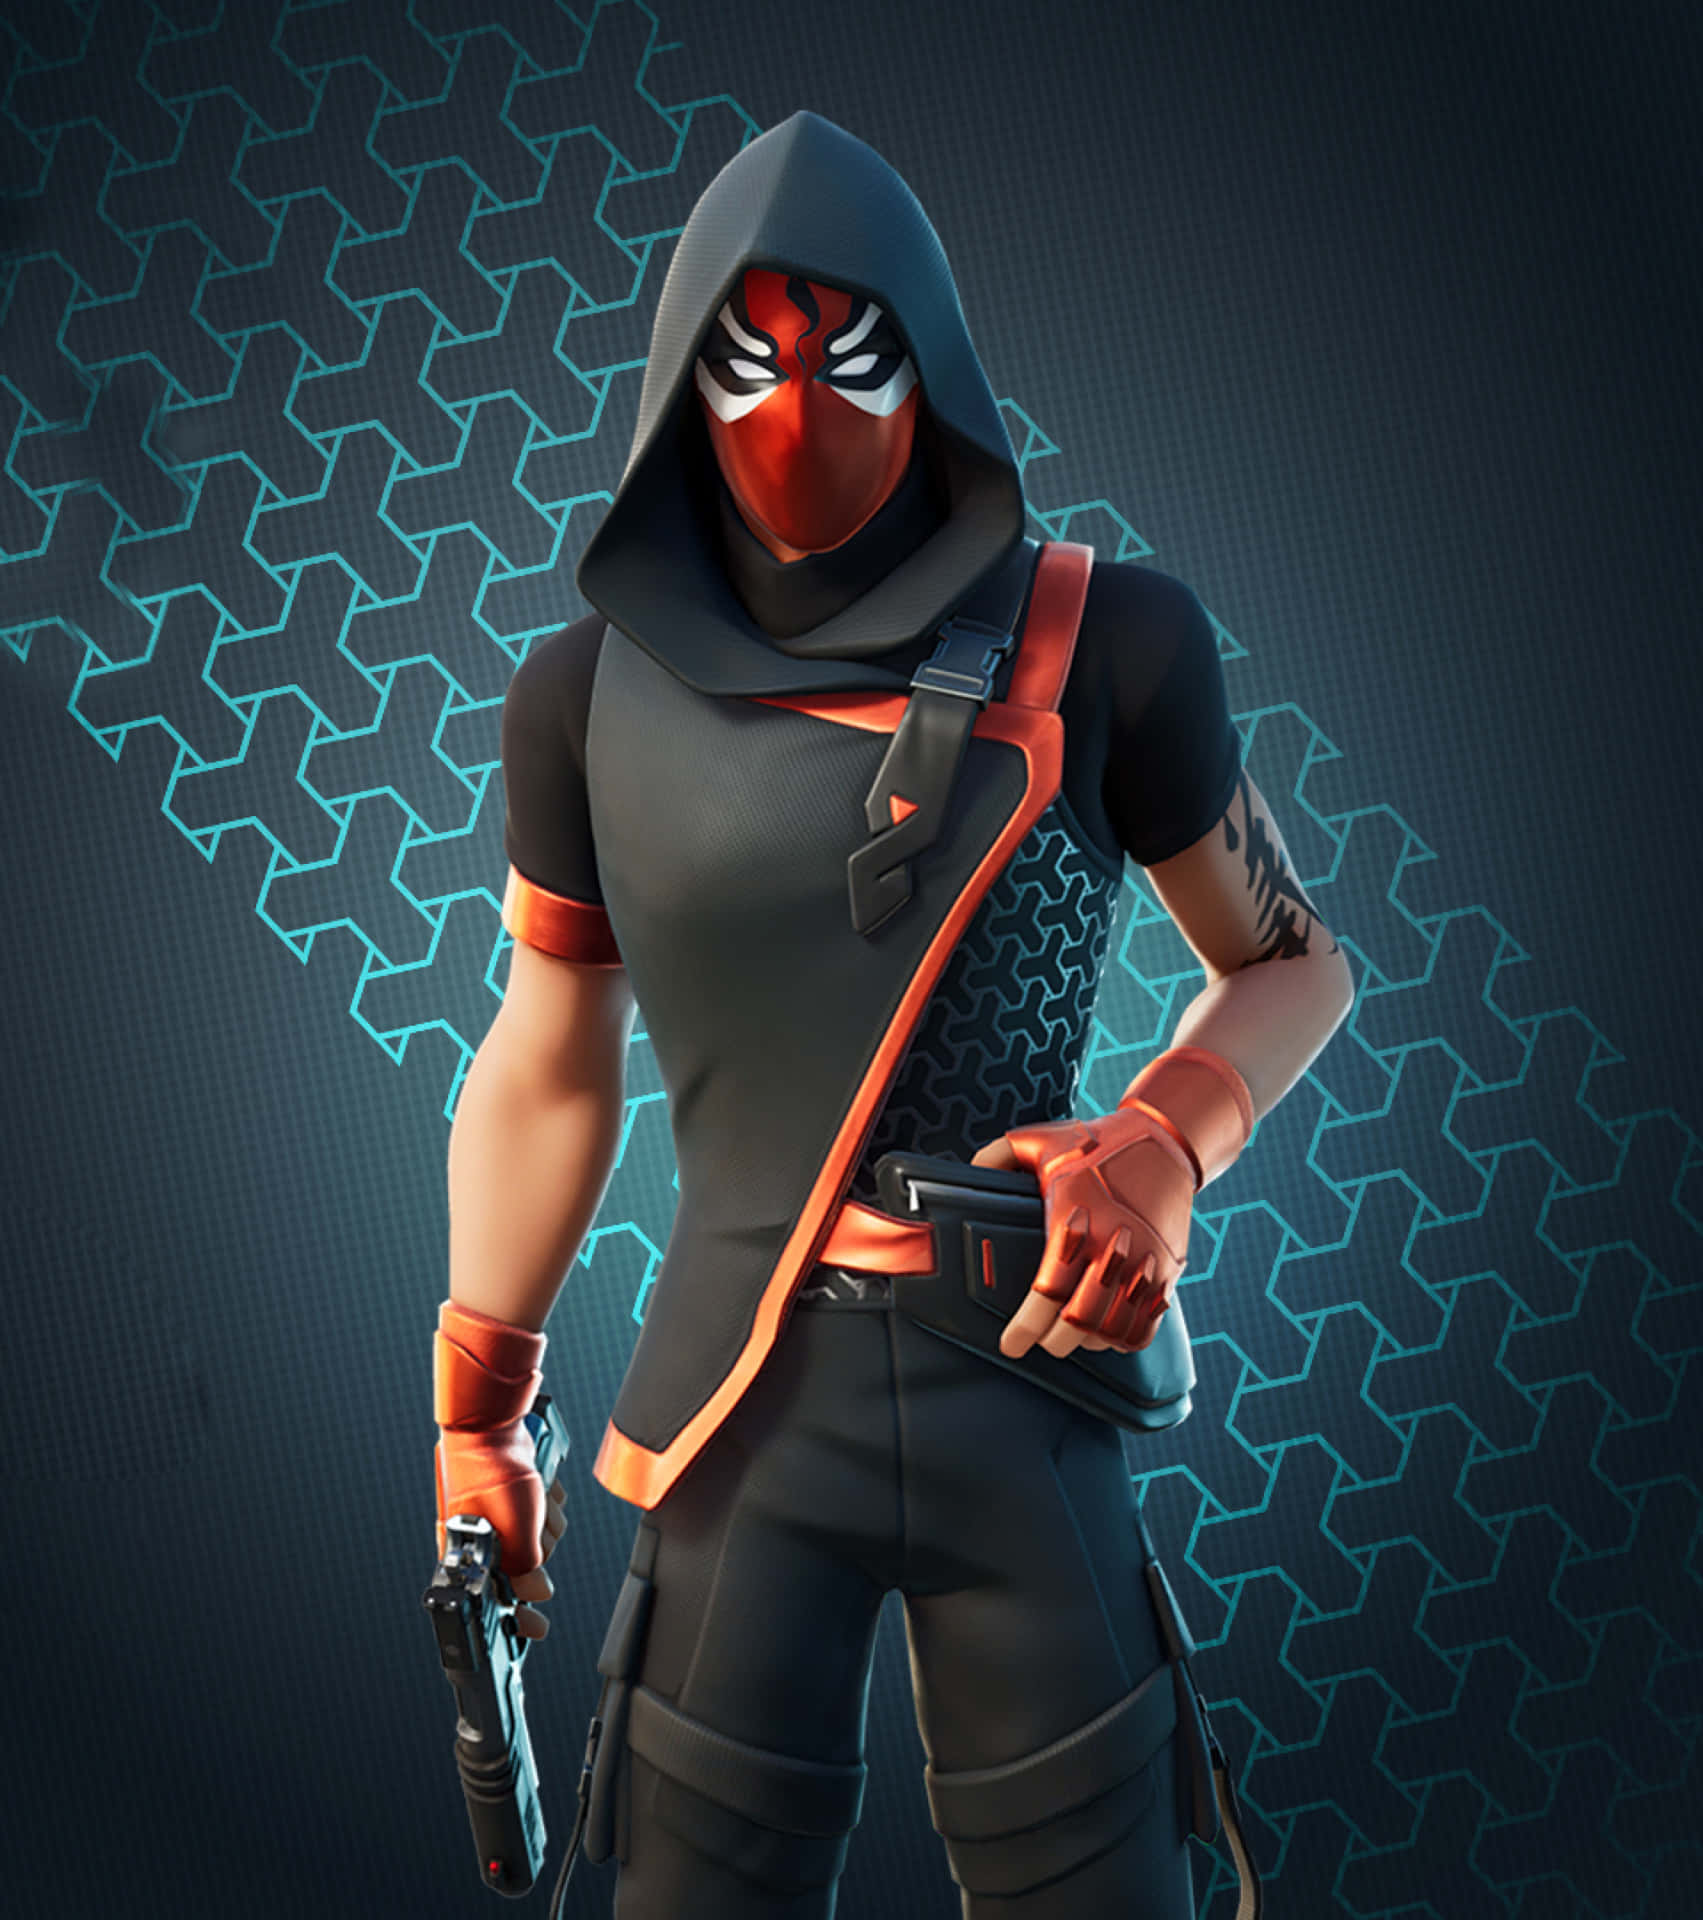 Get in the Game with the Fortnite Ikonik Skin Wallpaper